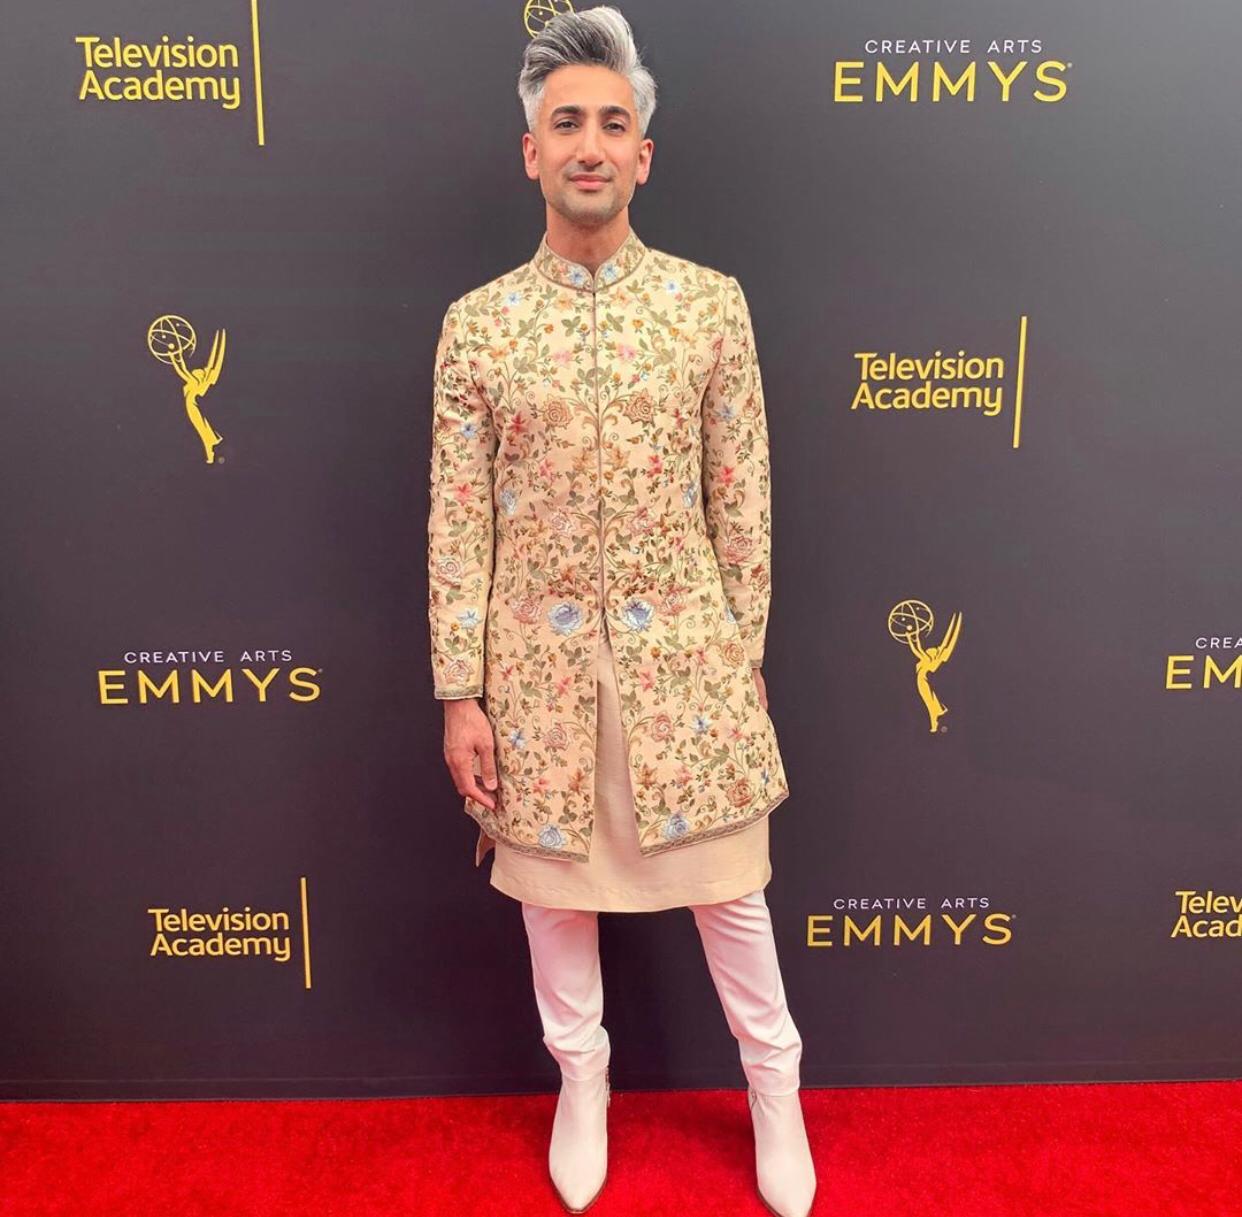 Tan France represents Pakistan at the Emmys!